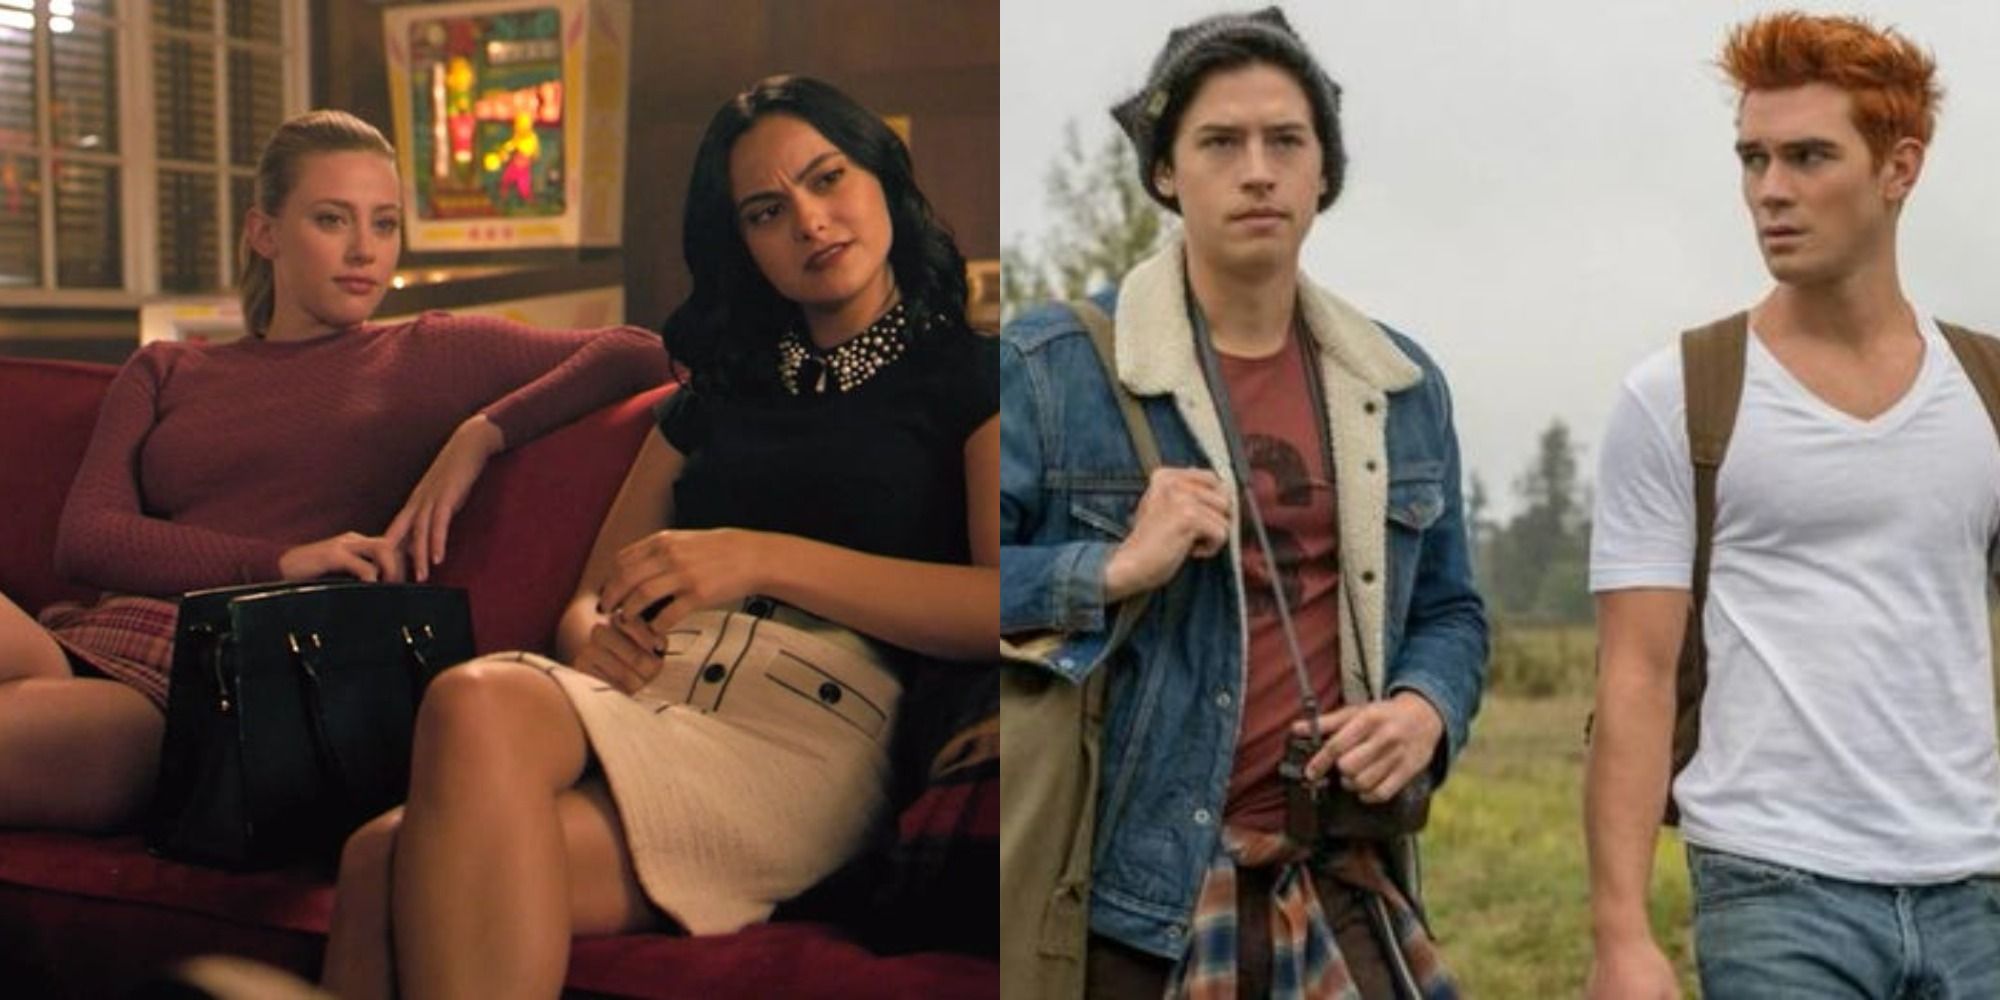 Two side by side images of cast of Riverdale.